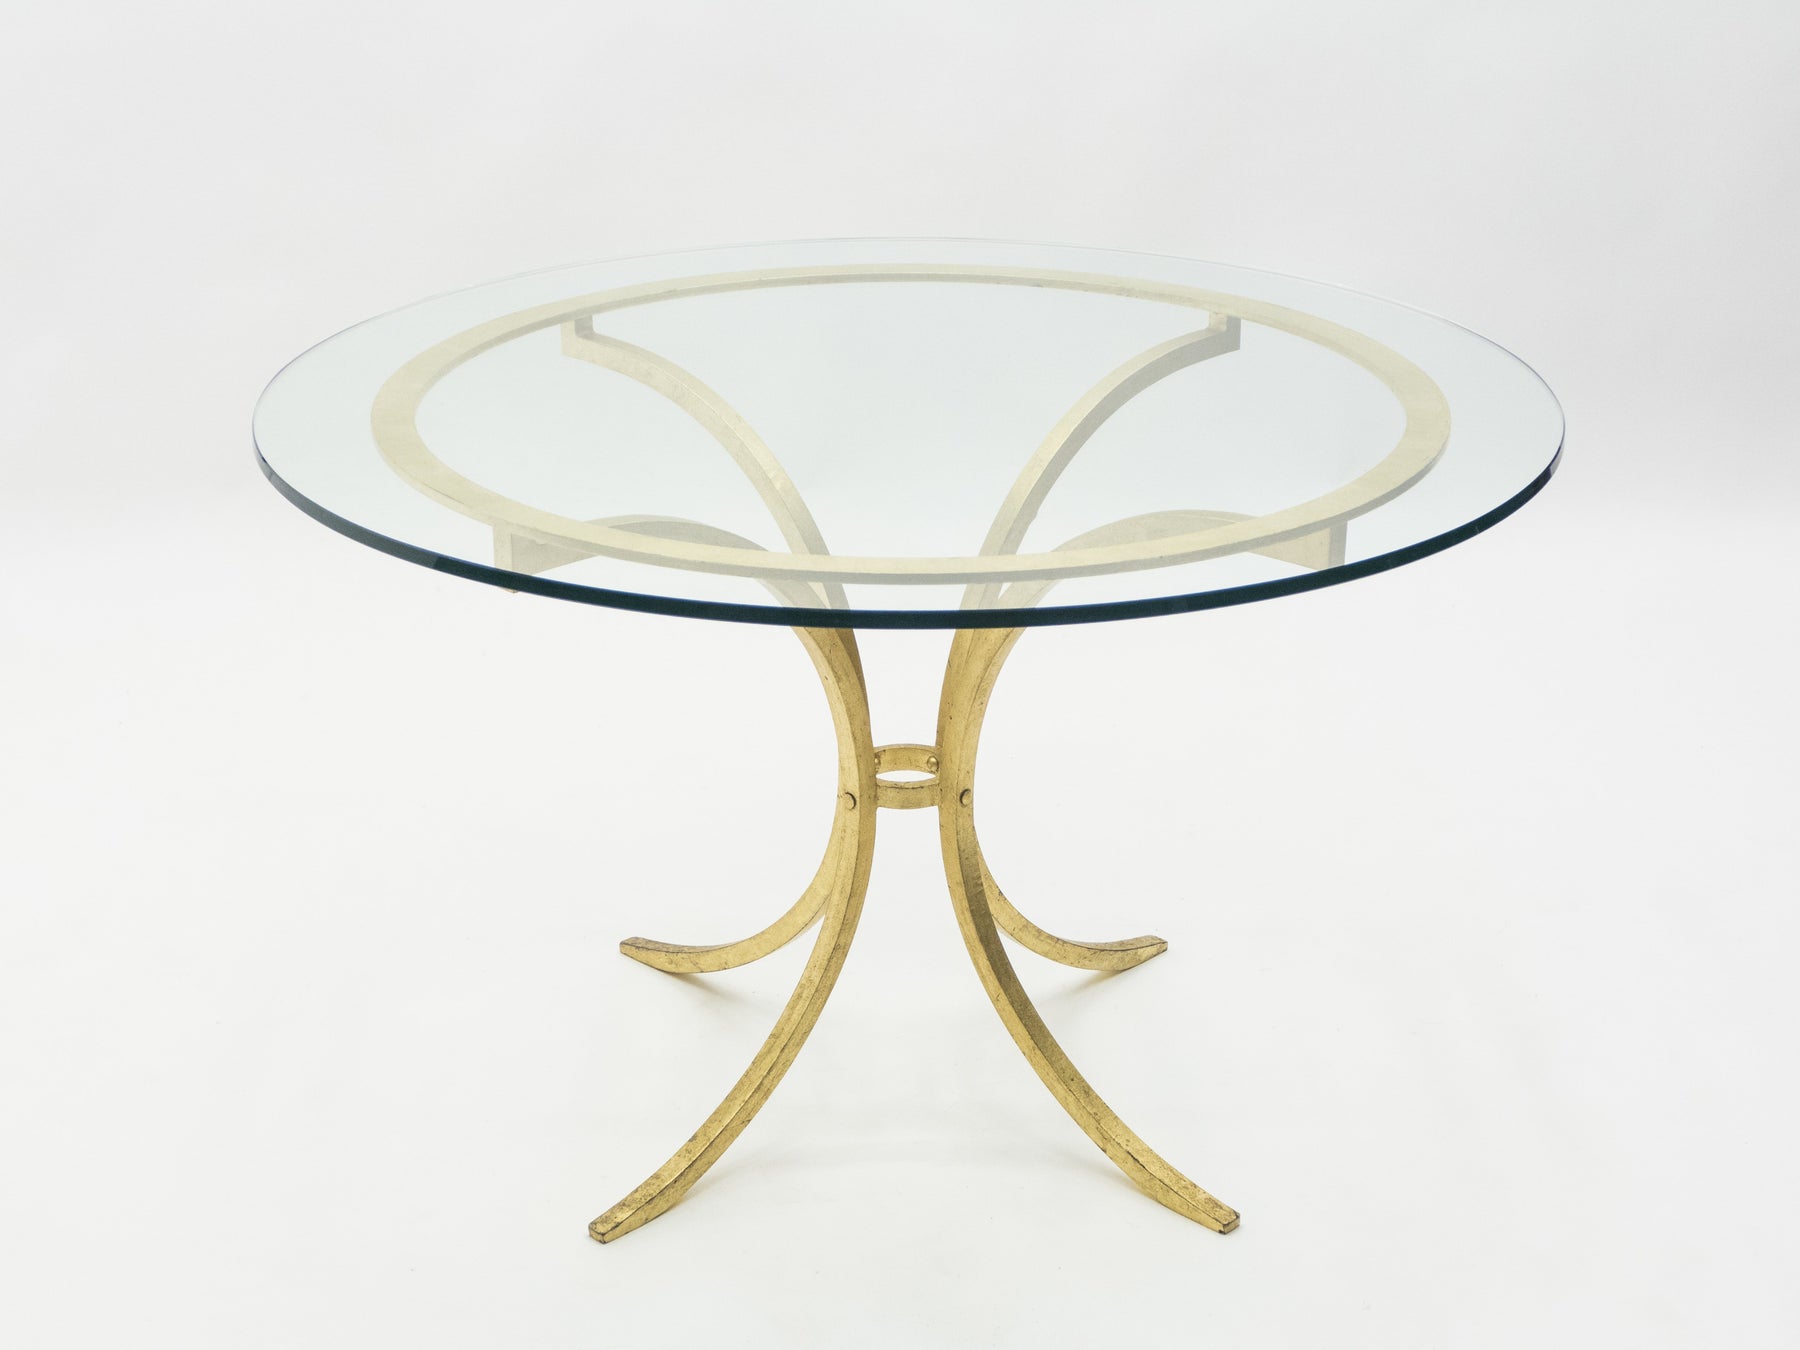 French Mid-century Roger Thibier gilt wrought iron gold leaf glass dining table 1960s